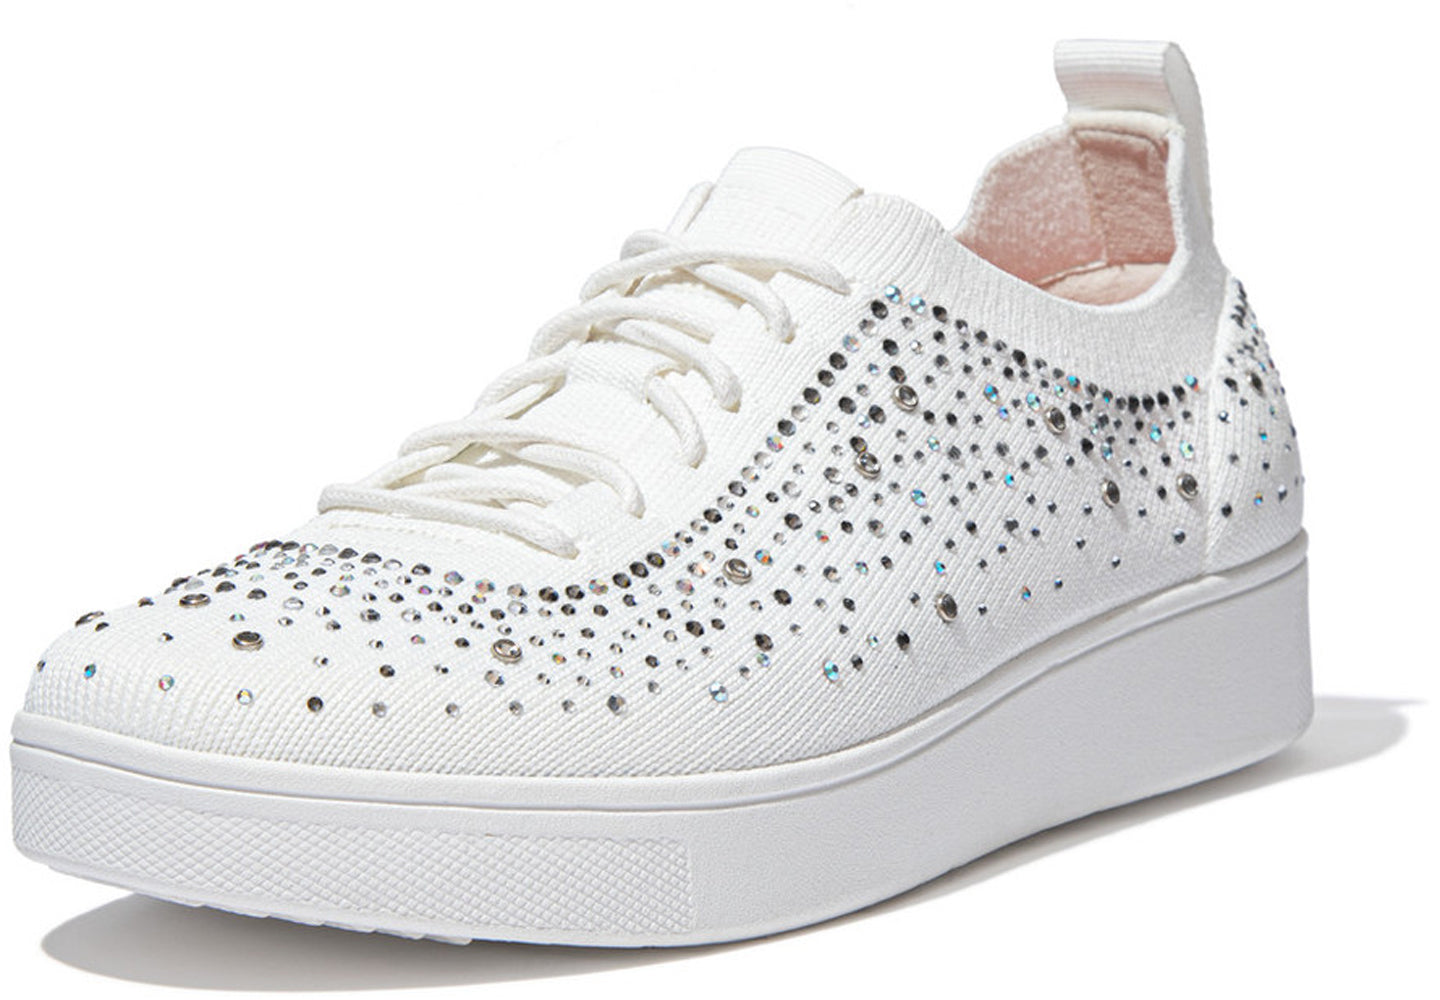 Women's FitFlop Rally Ombre Crystal Knit Sneaker in Urban White from the side view